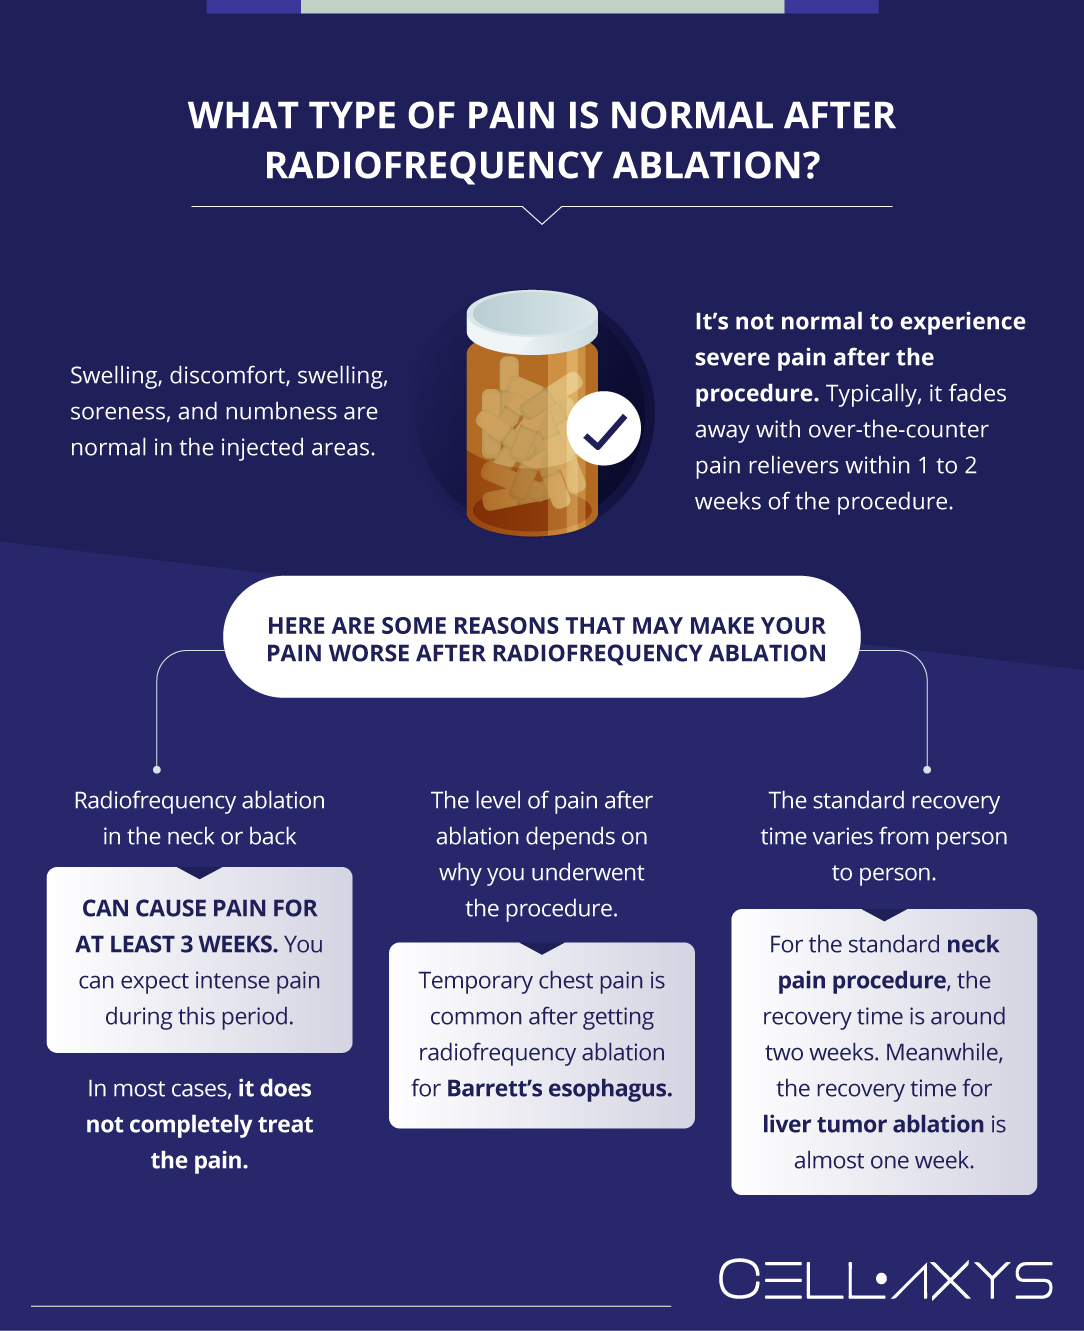 What Type of Pain is Normal After Radiofrequency Ablation? 